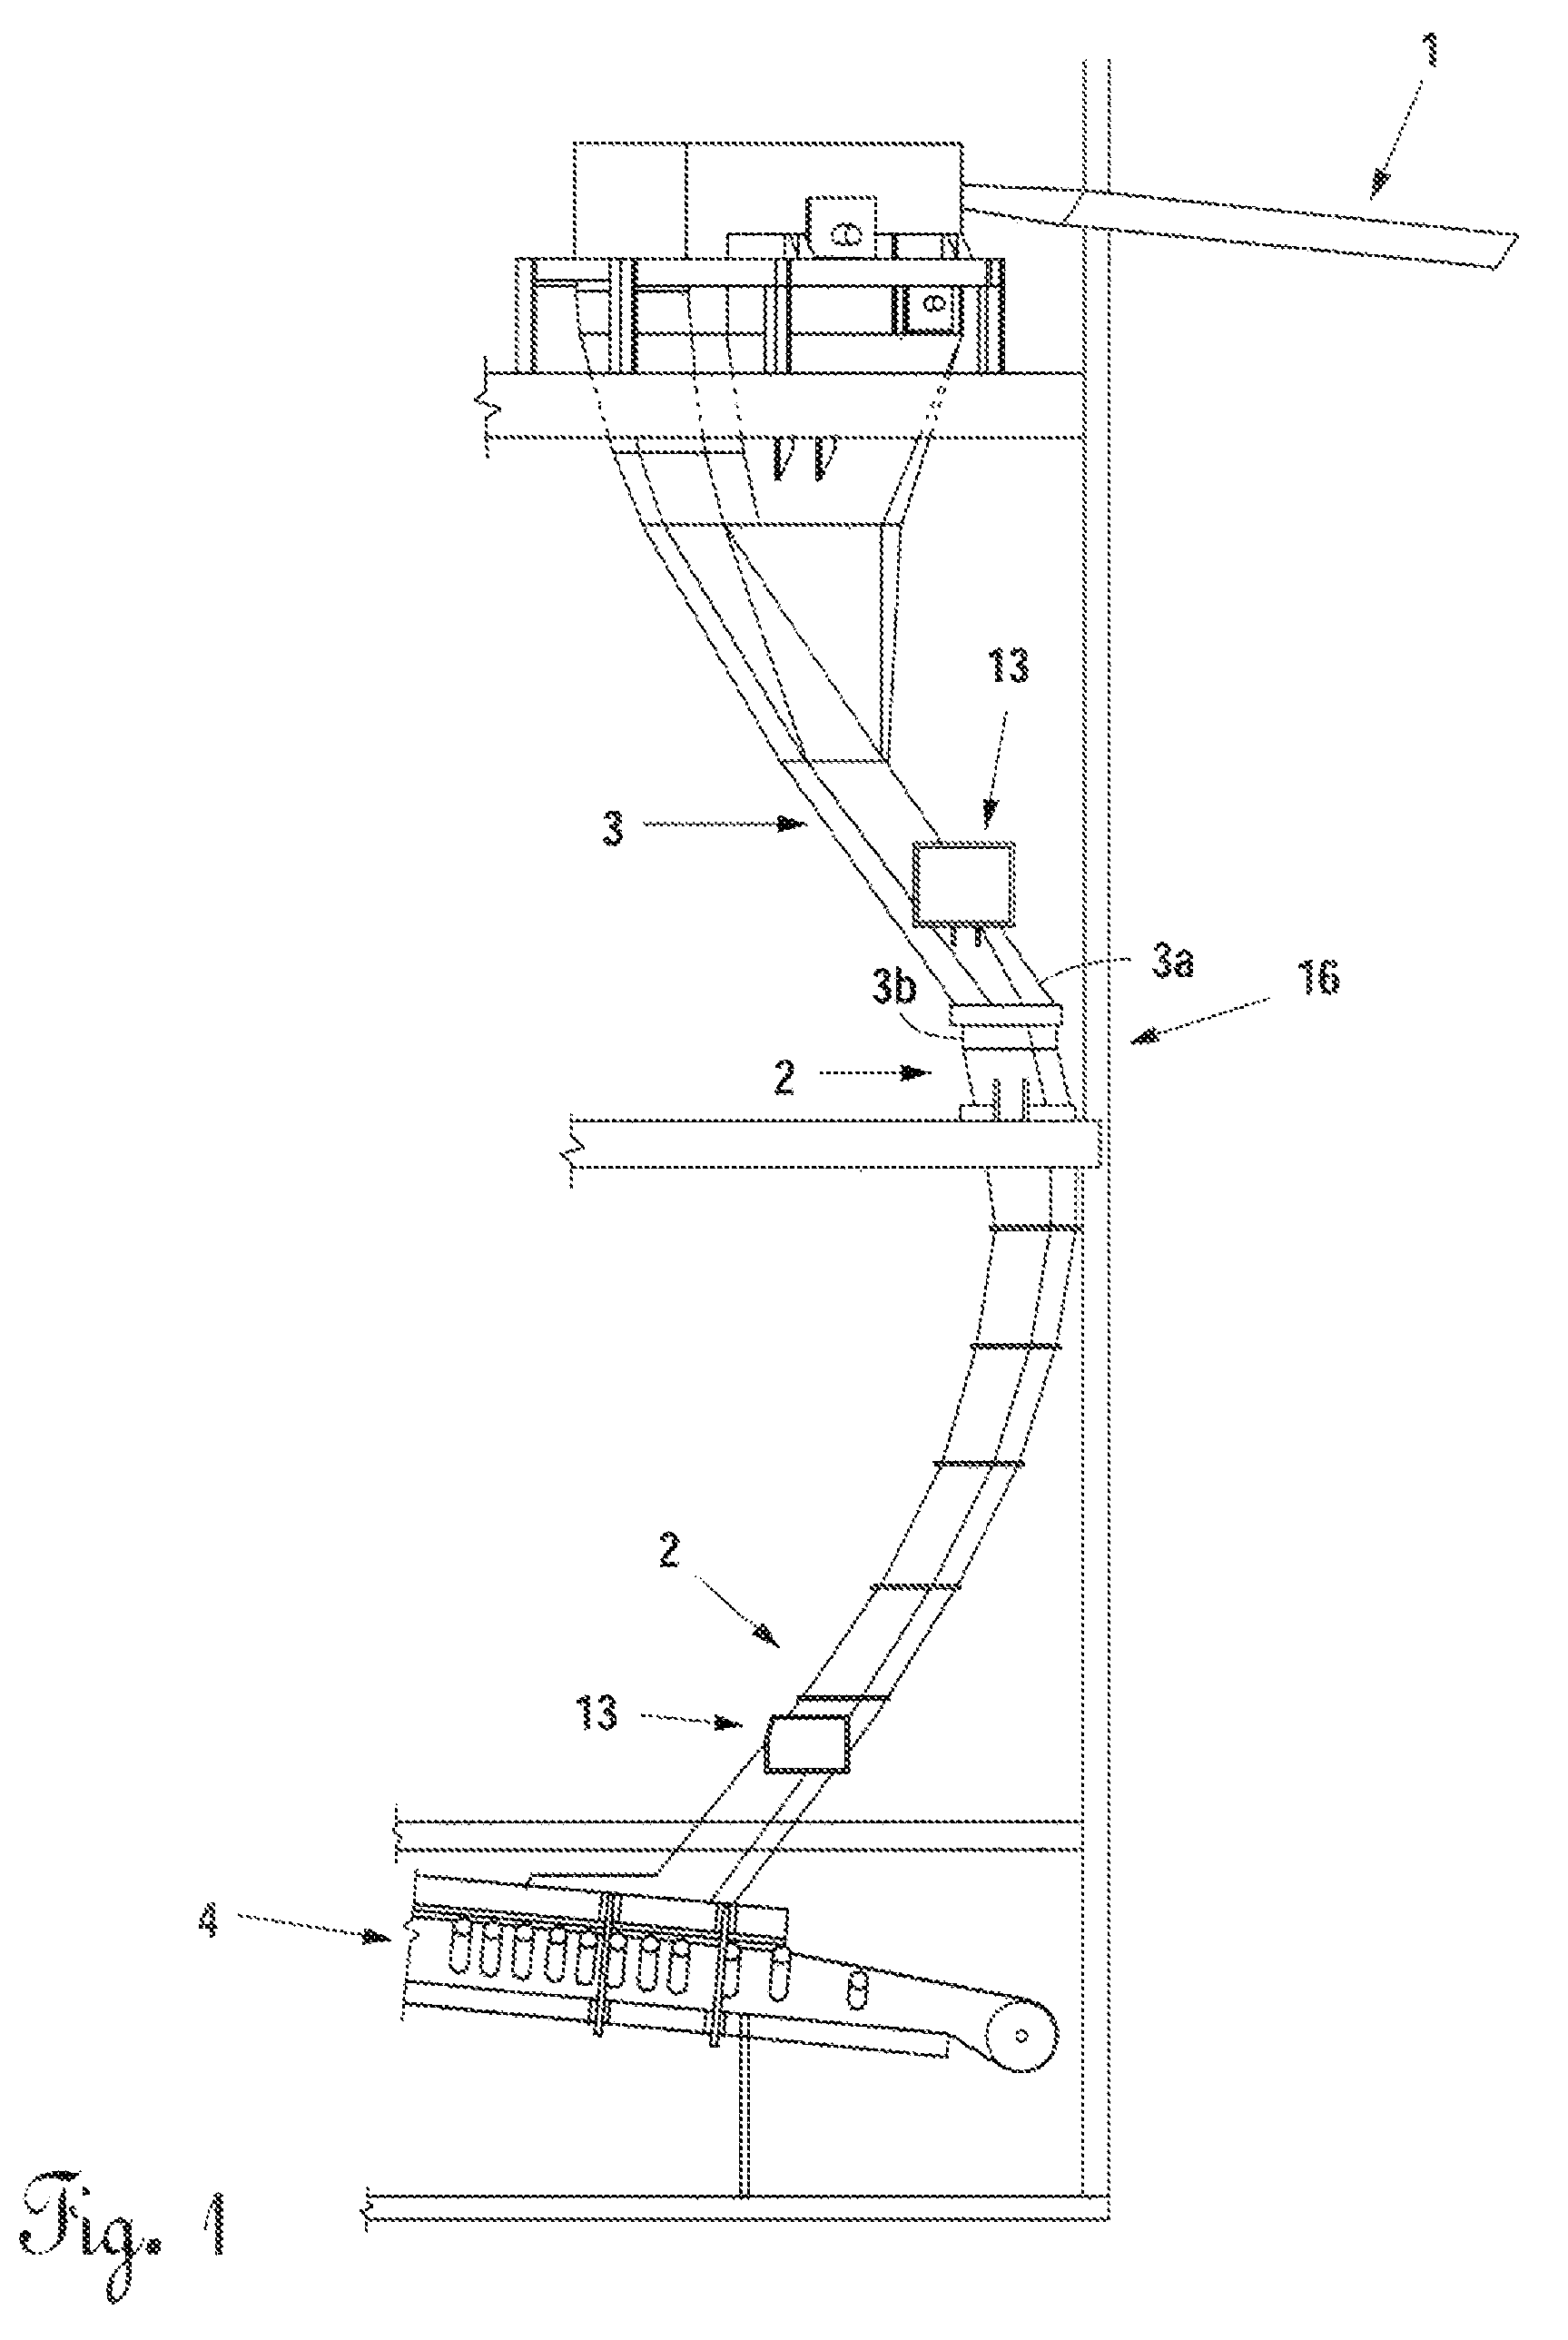 Apparatus and method for passive dust control in a transfer chute